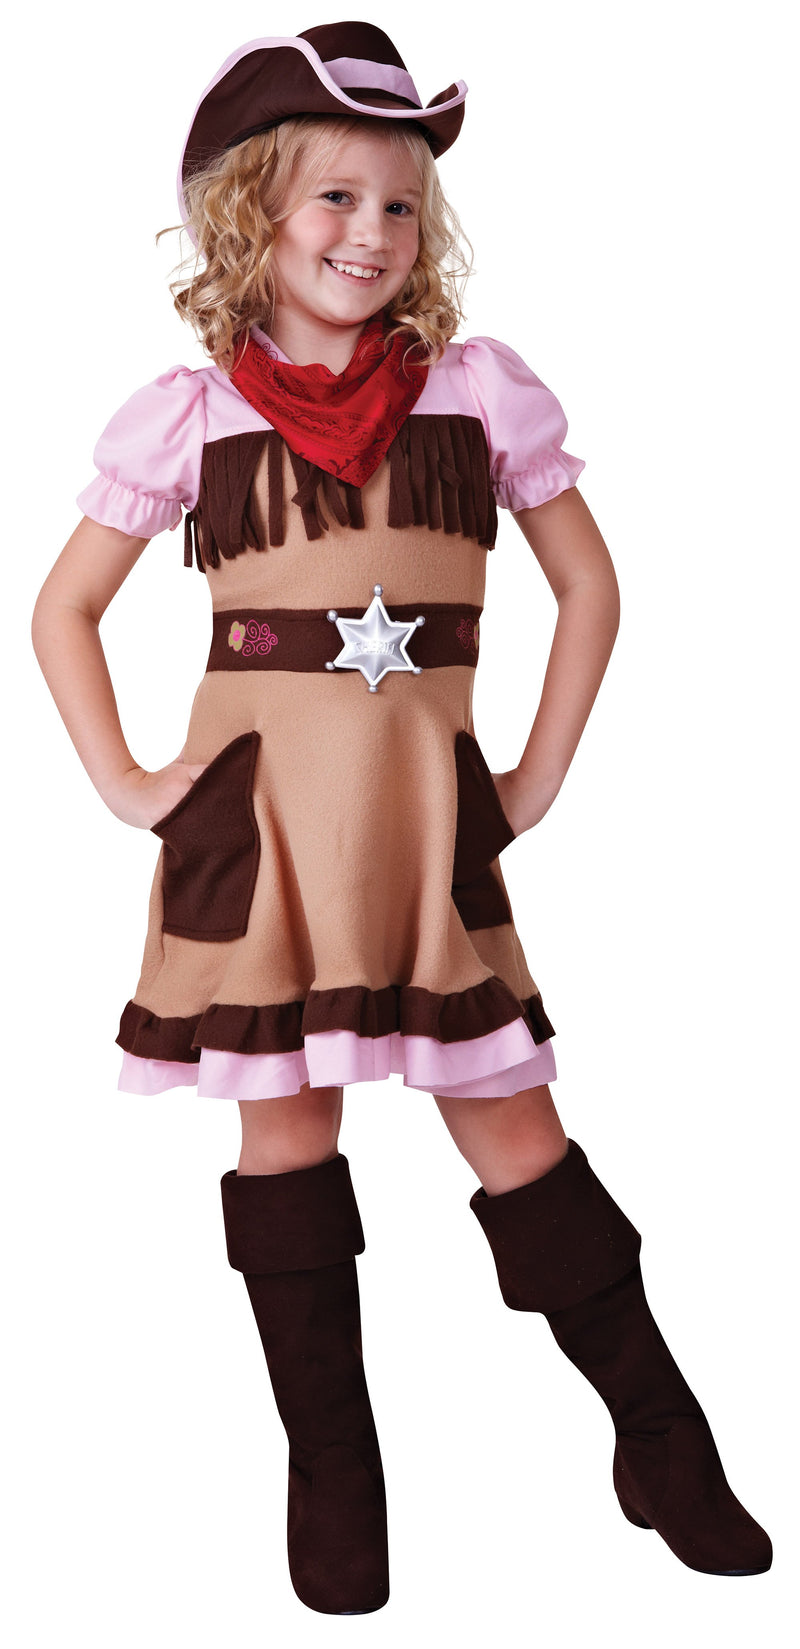 Cowgirl Cutie S Childrens Costumes Female To Fit Child Of Height 110cm 122cm Girls Bristol Novelty Childrens Costumes 2248